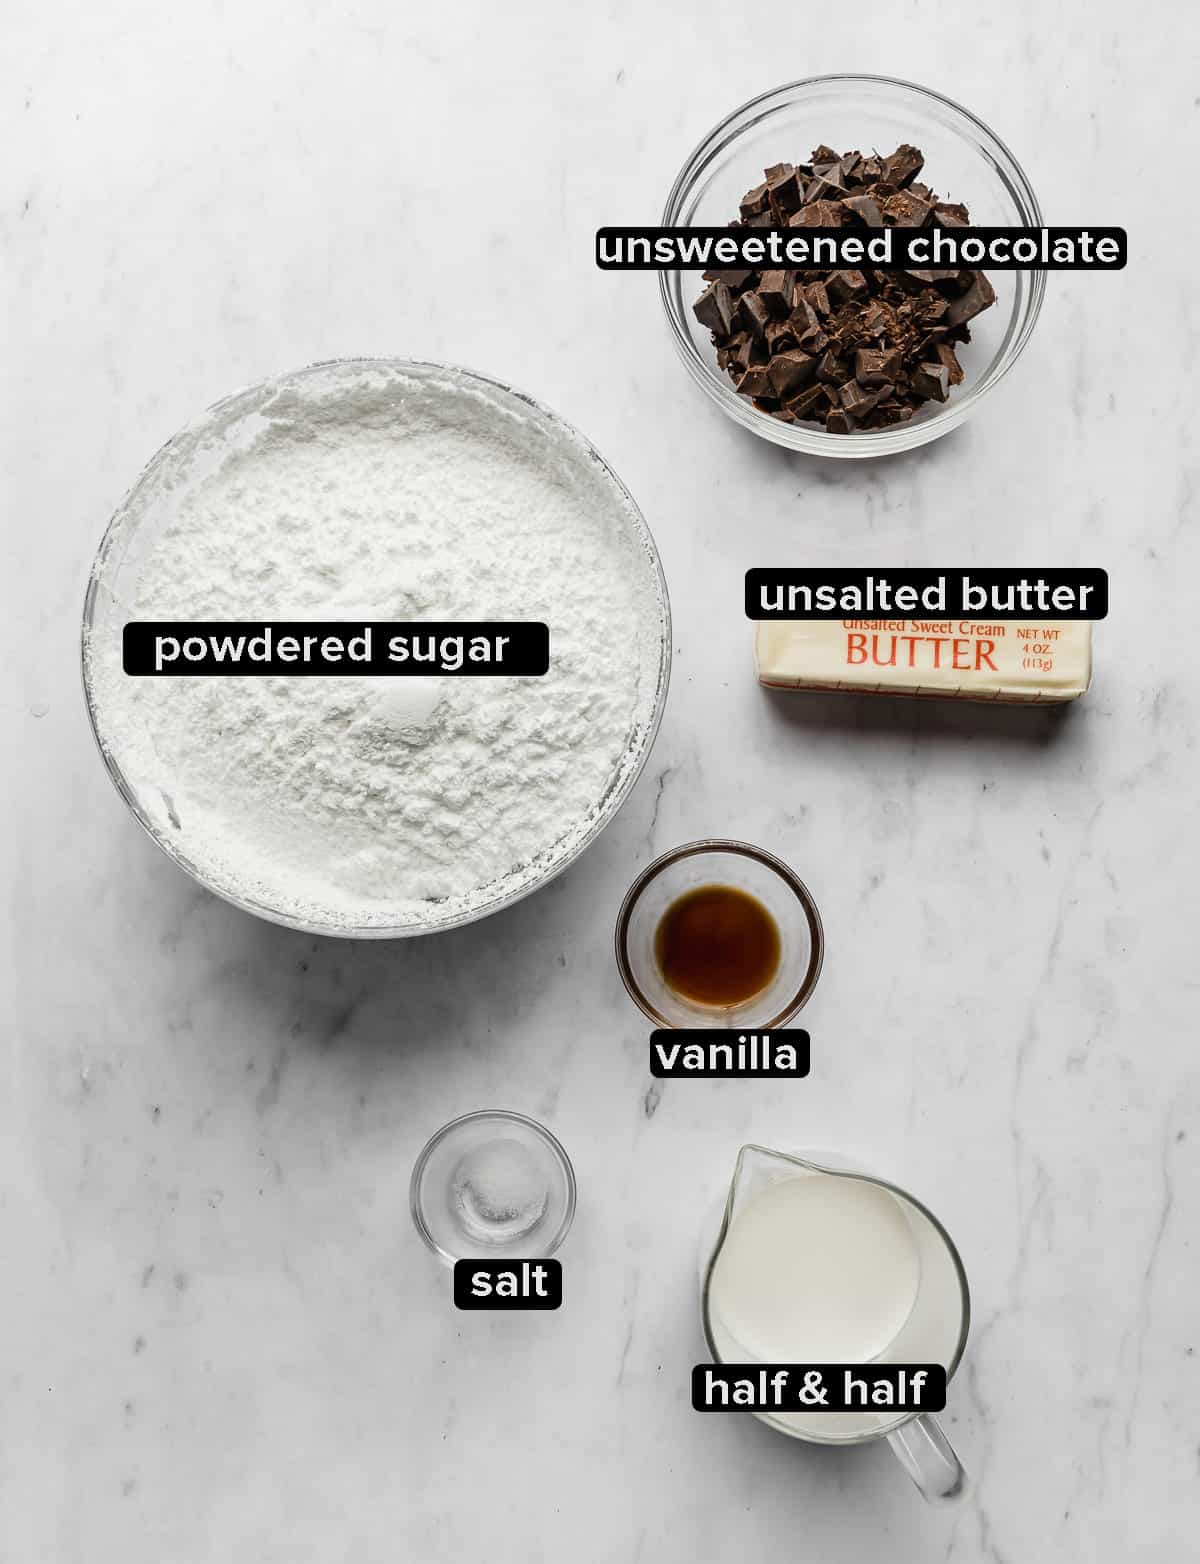 Ingredients used to make the chocolate frosting on a chocolate Bundt Cake: ingredients include powdered sugar, unsweetened chocolate, butter, vanilla, half and half, and salt.